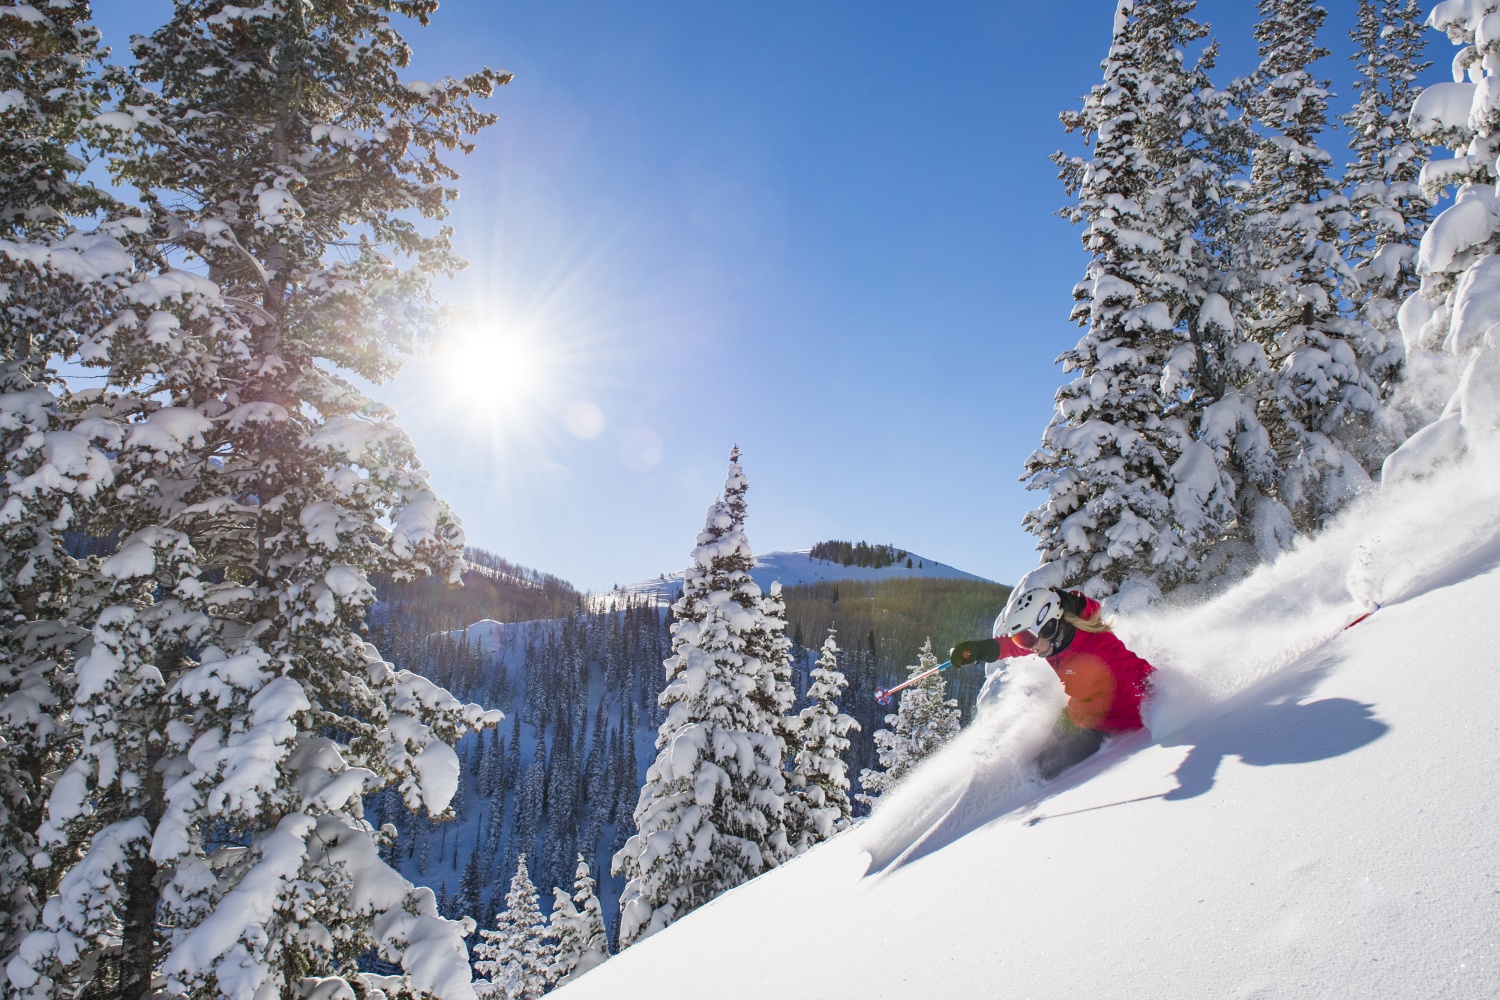 A skier carves a turn through deep snow surrounded by trees and blue sky in Park City, UT